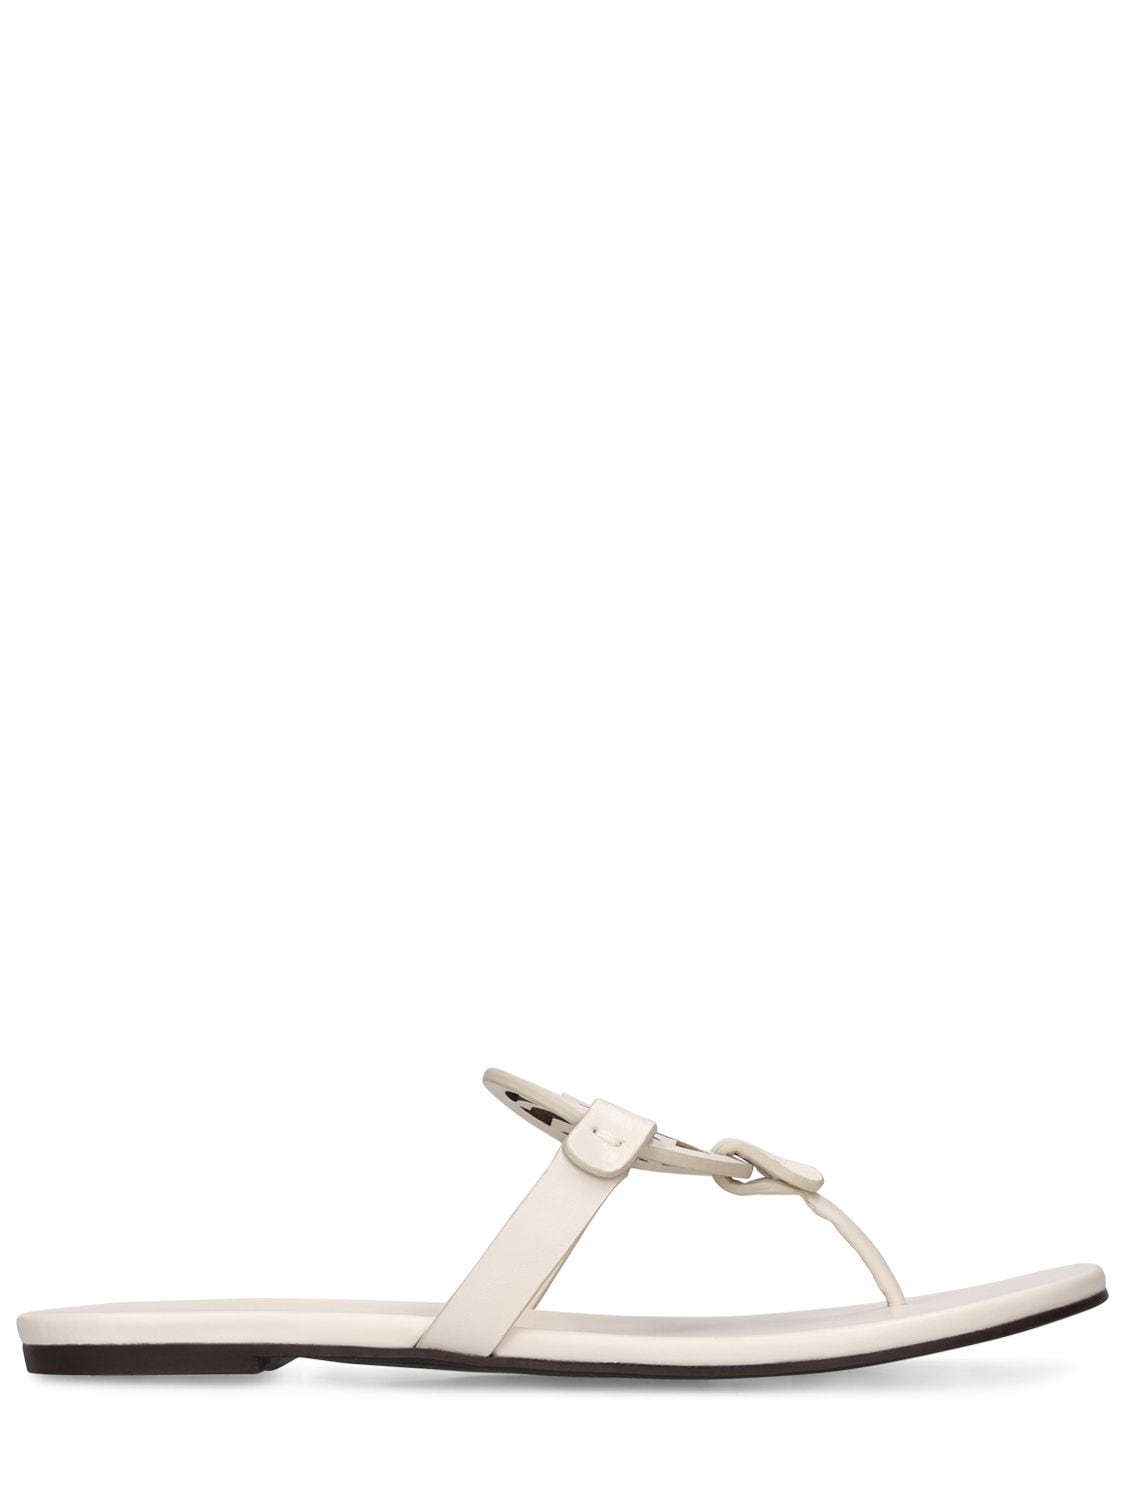 Tory Burch Miller Knotted Sandal In Ivory | ModeSens